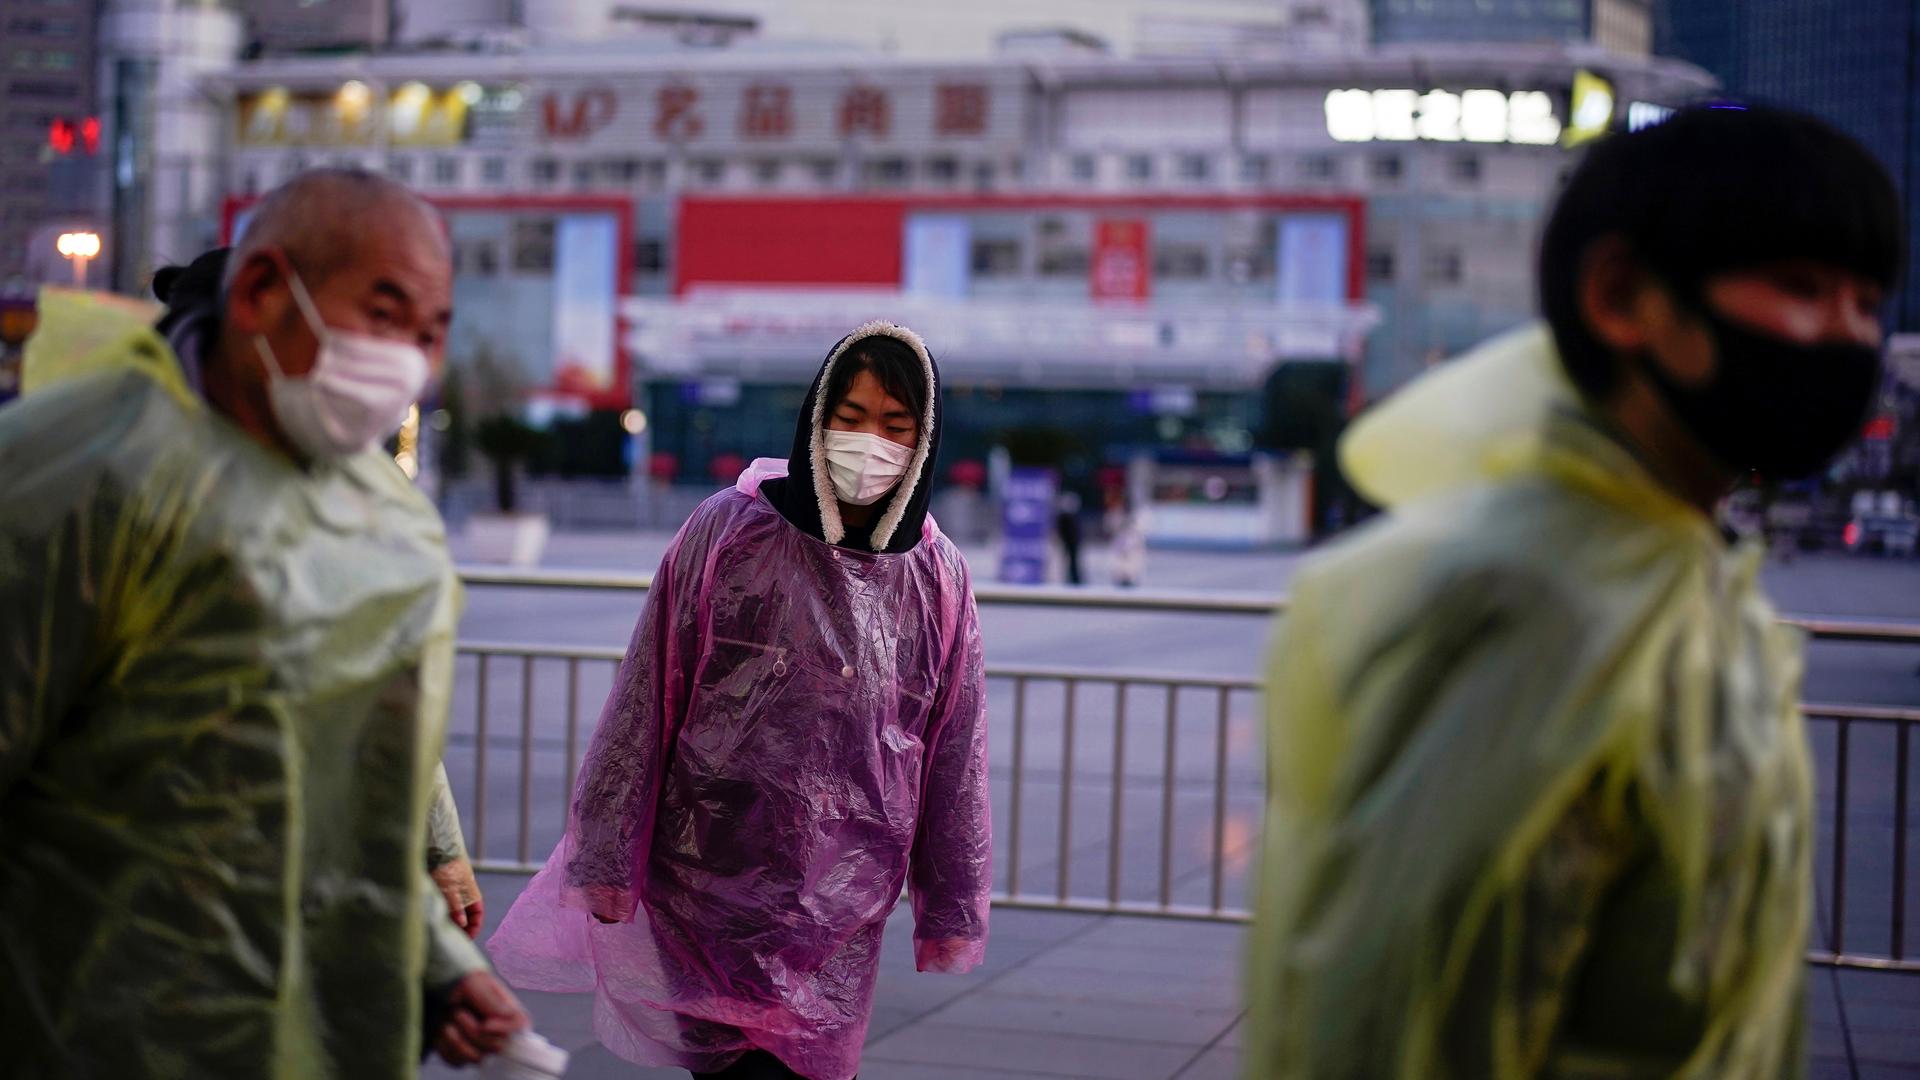 People wear face masks and plastic raincoats as a protection from coronavirus near the Shanghai railway station as the country is hit by an outbreak of the novel coronavirus, in Shanghai, March 5, 2020. 